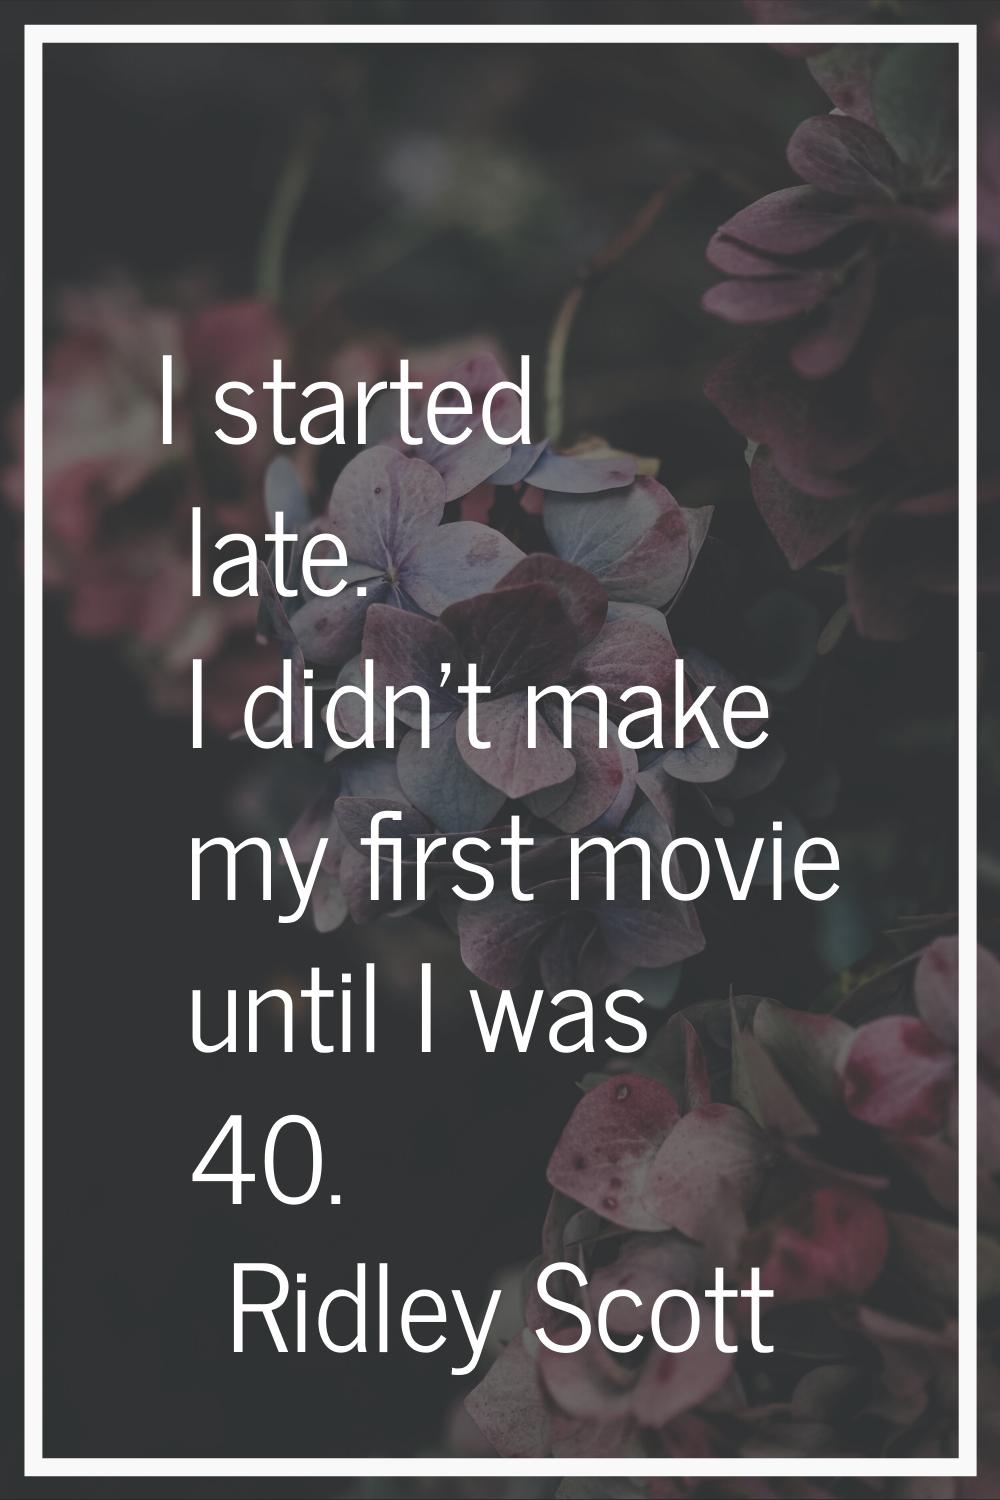 I started late. I didn't make my first movie until I was 40.